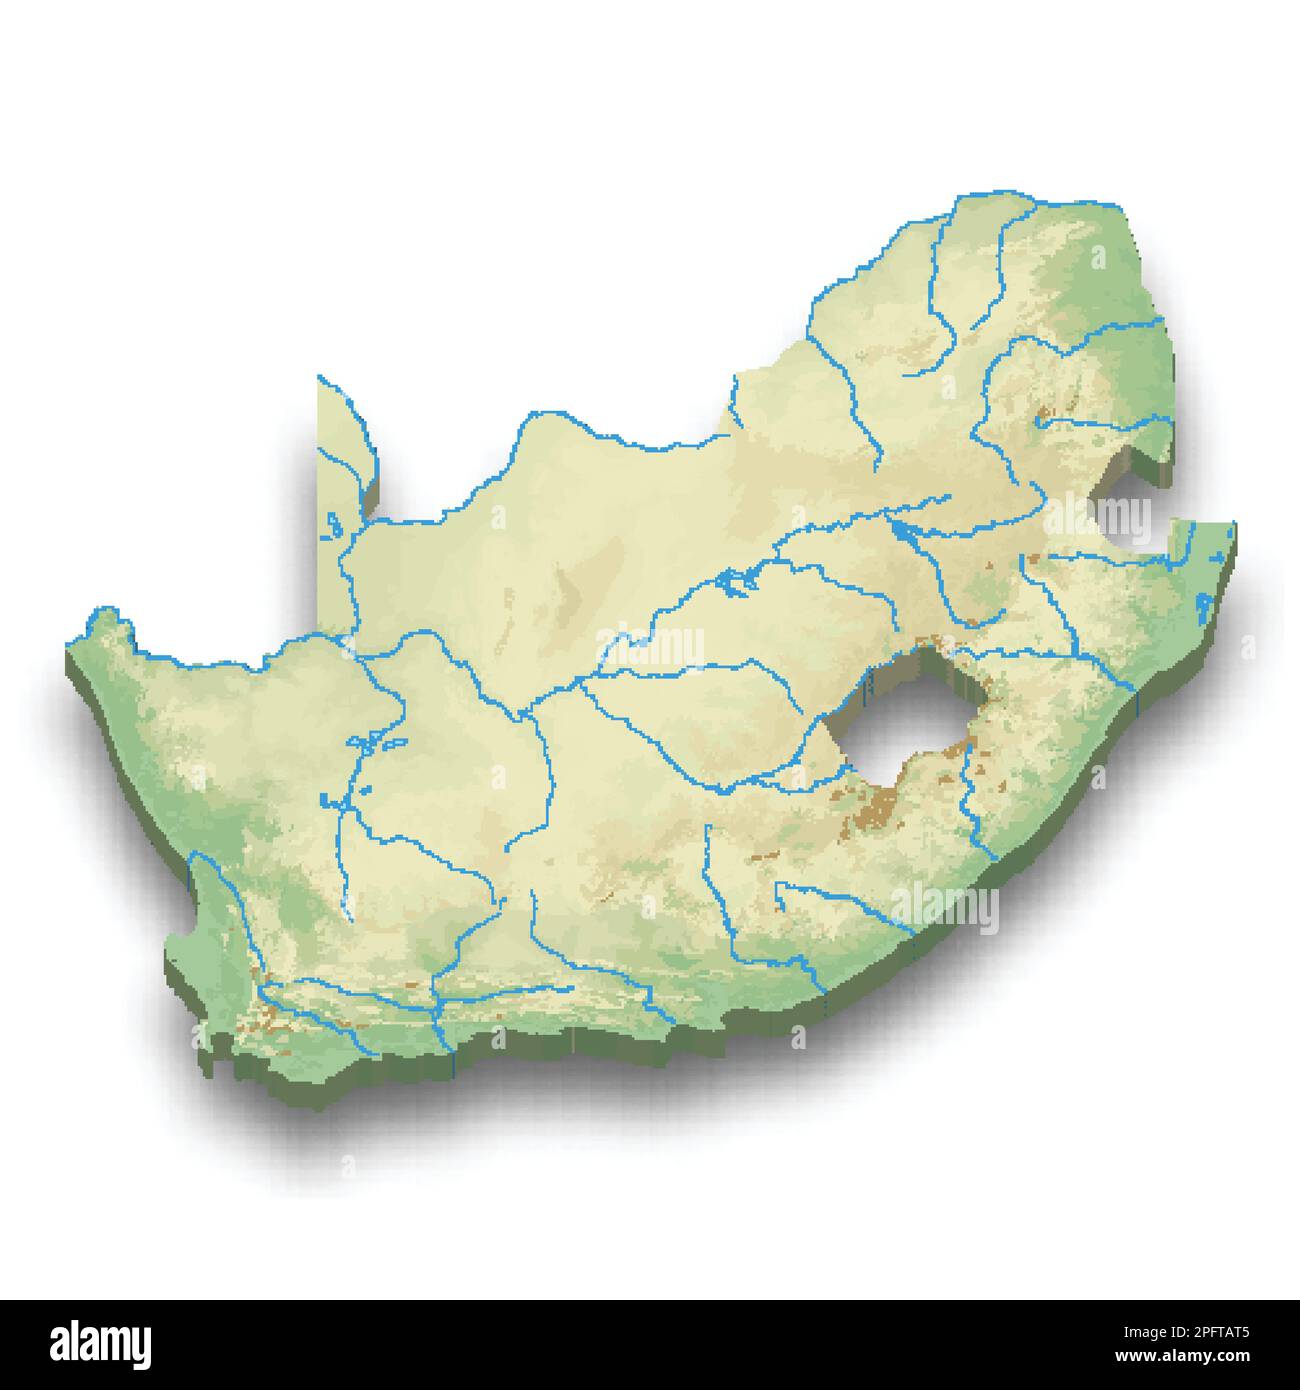 South africa relief map Stock Vector Images - Alamy